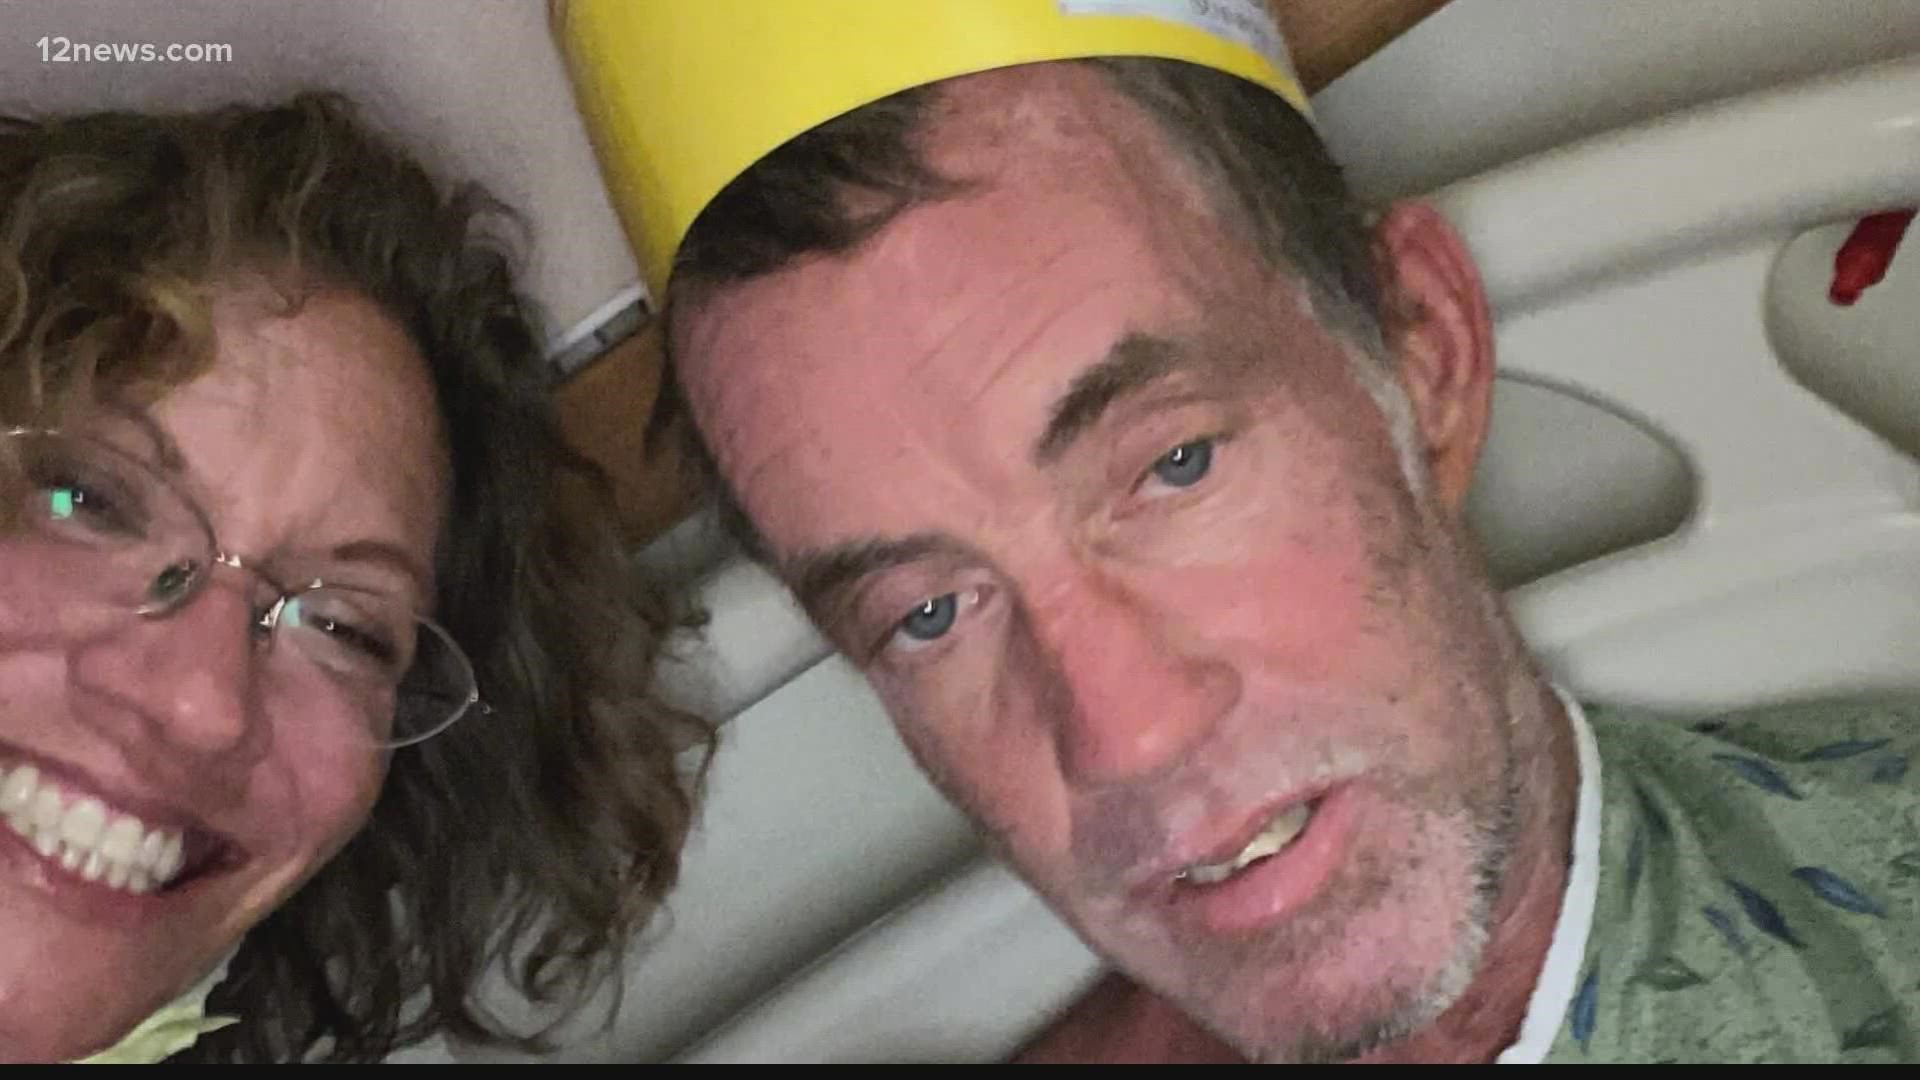 A Valley woman is calling for change after a homeless man with cancer is left on the streets.